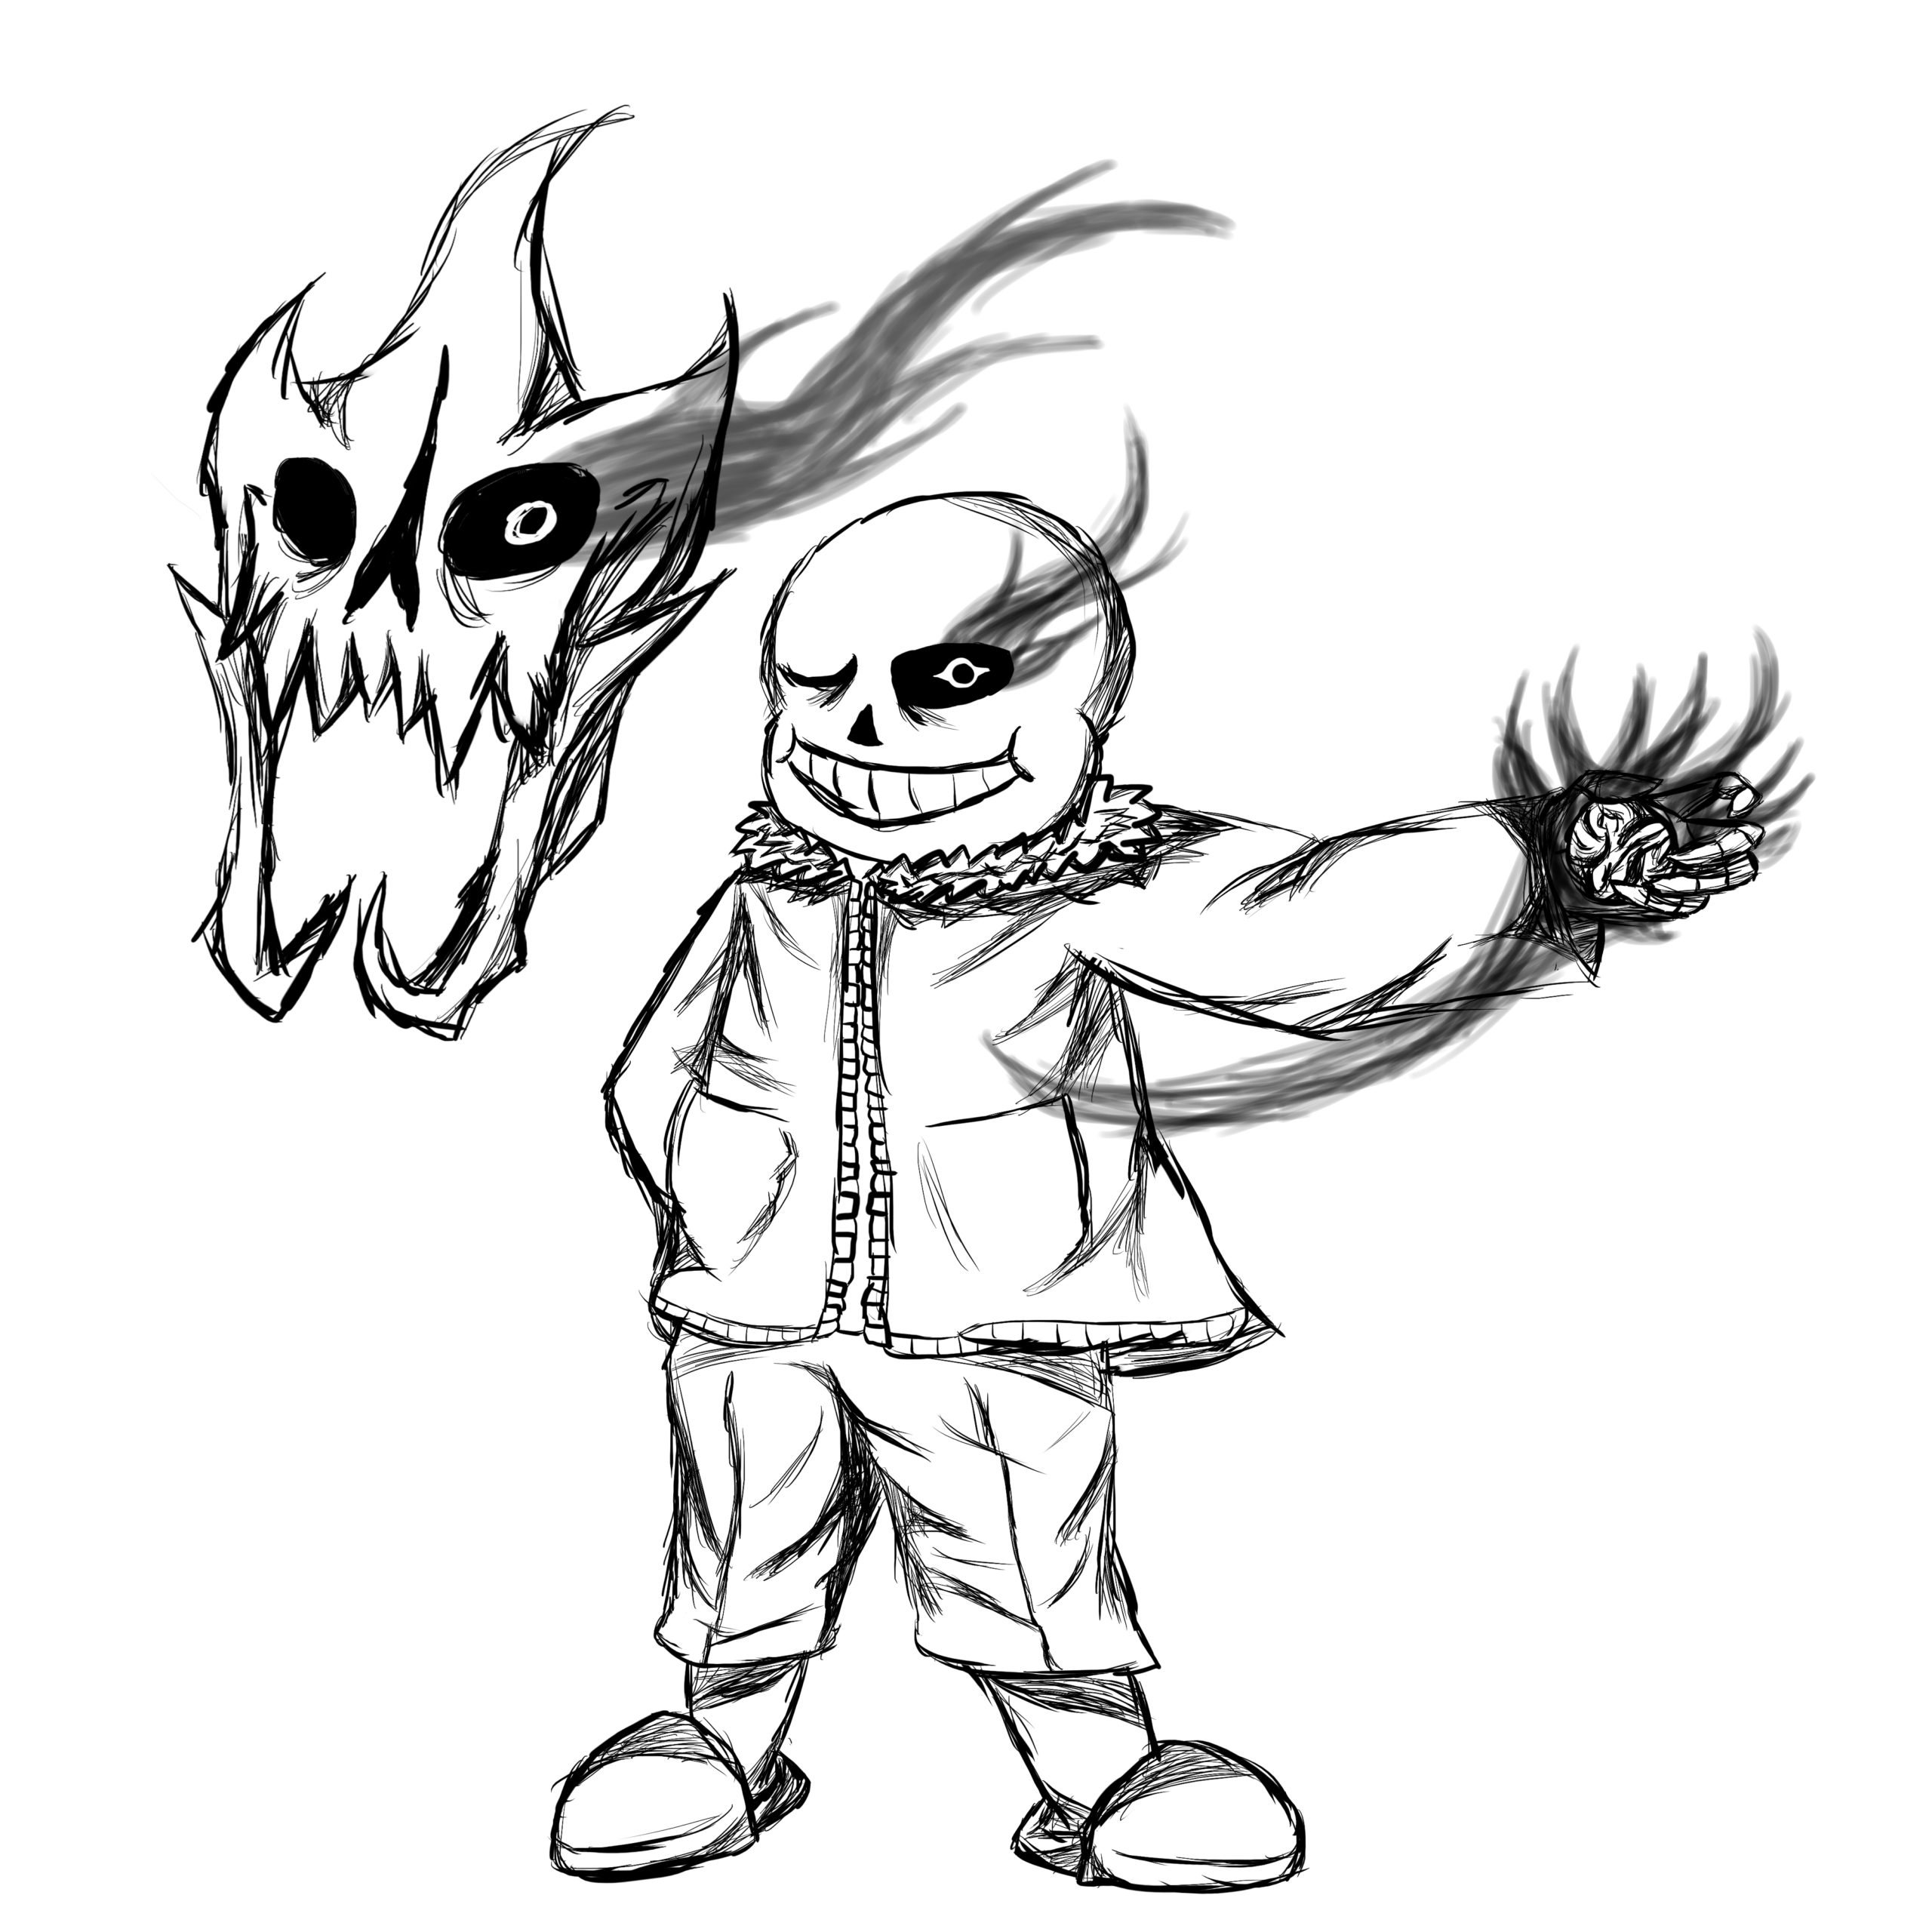 Coloring Pages : Coloring Undertale Sans Fight You Ll Never Forget ...